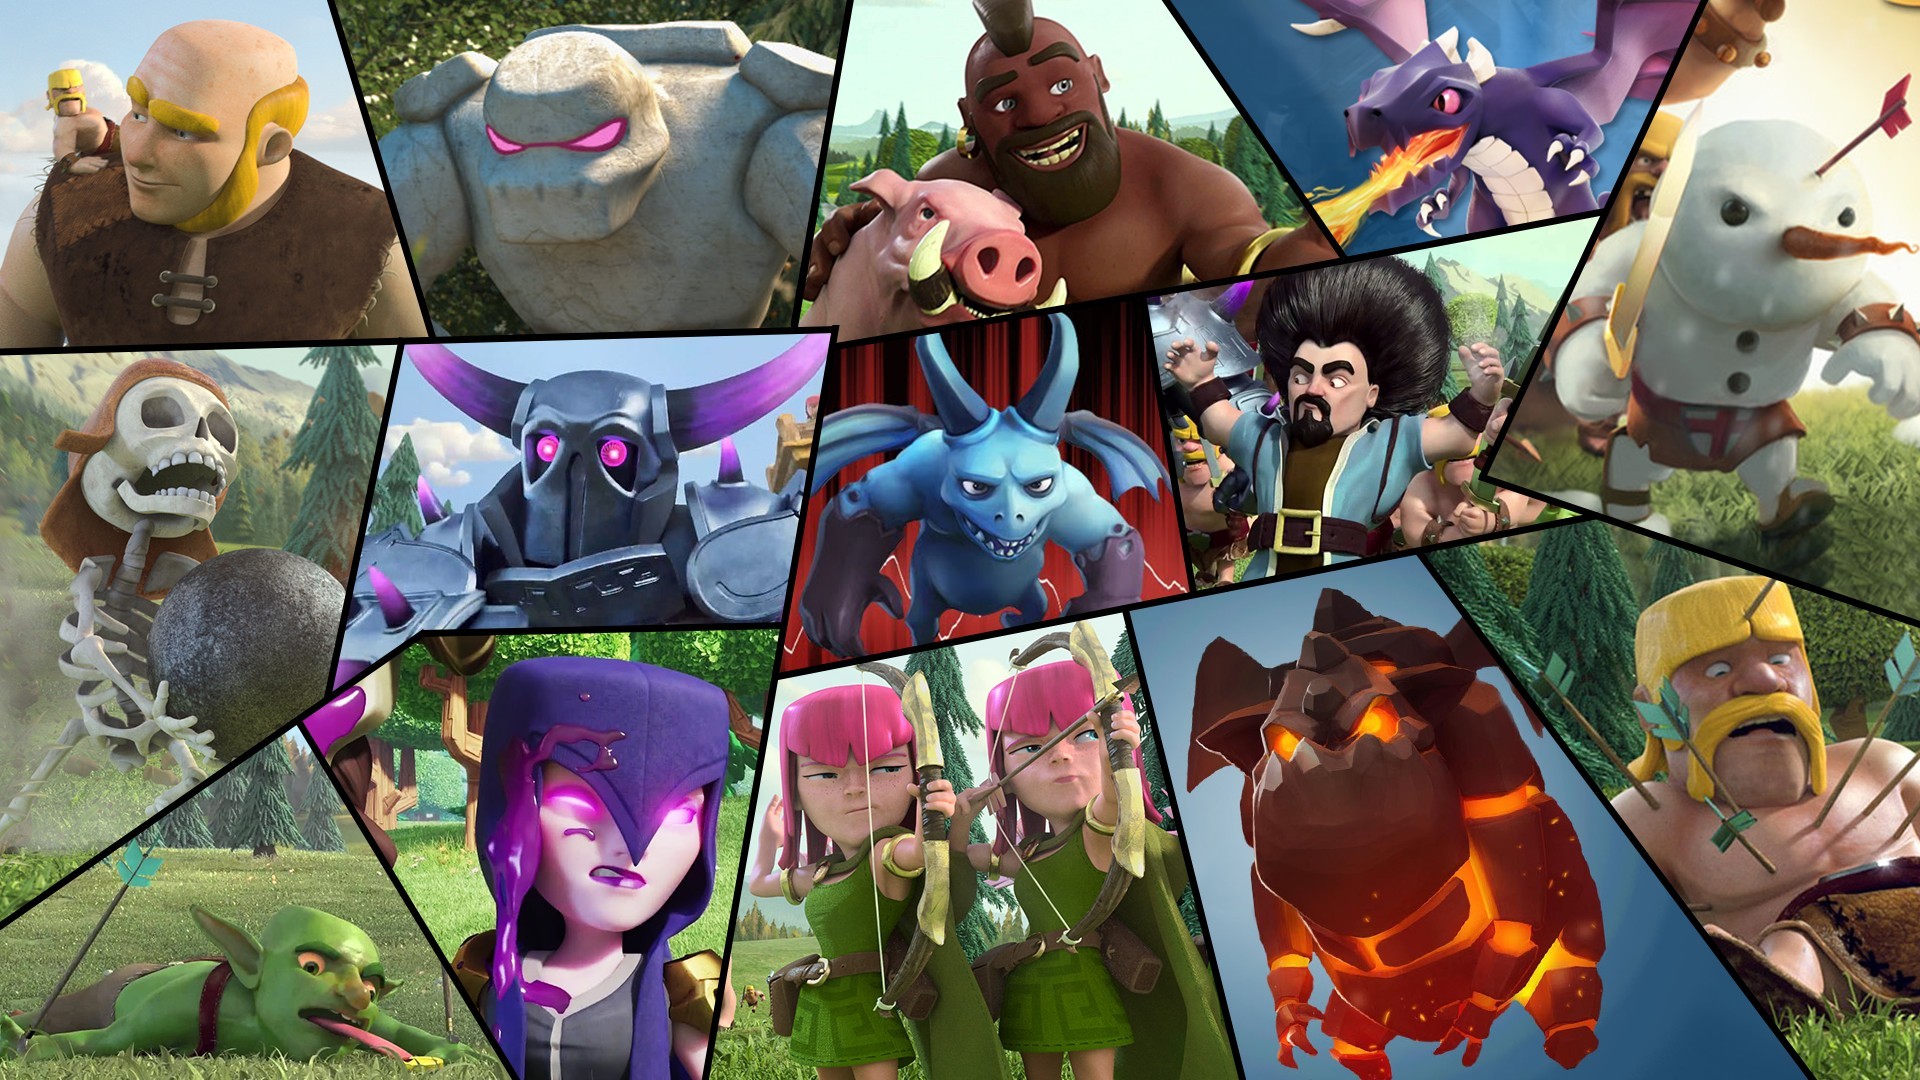 Video Game Clash Of Clans 1920x1080